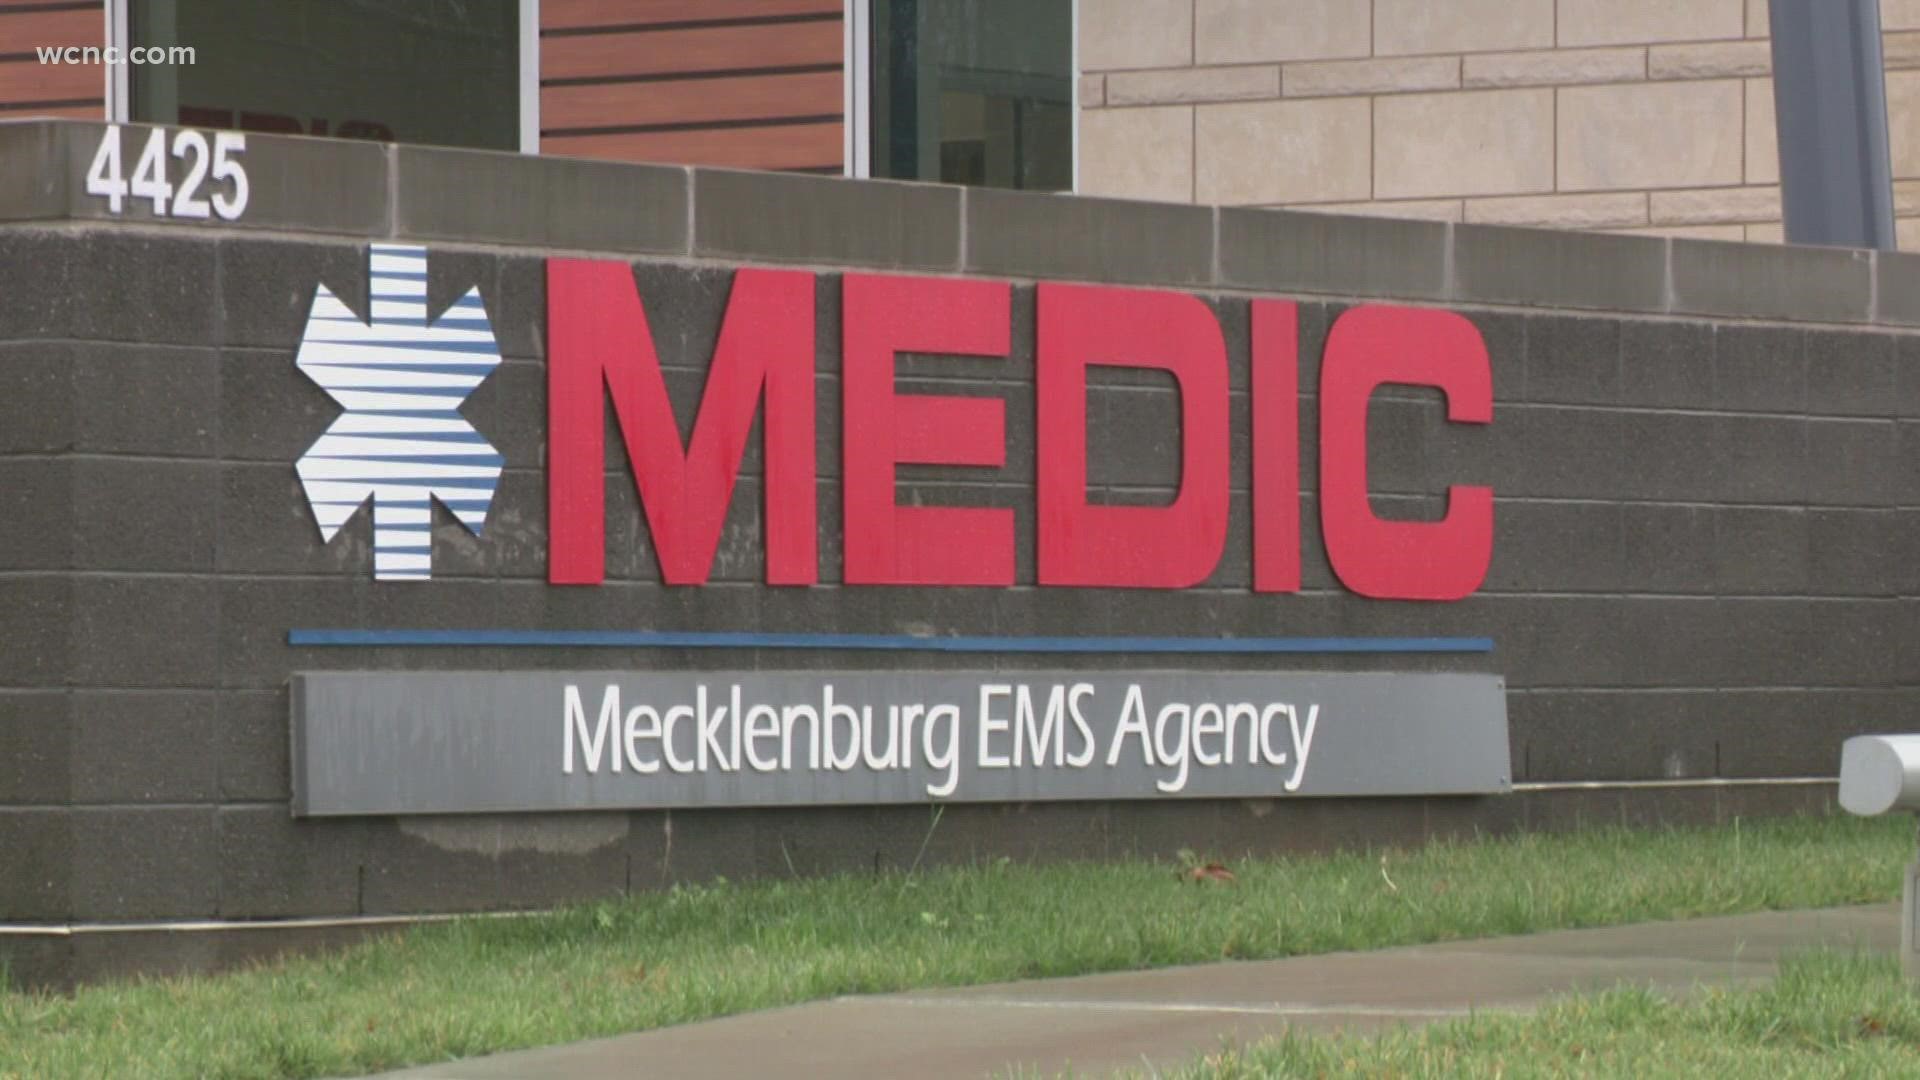 Mecklenburg EMS said it's been struggling with staffing shortages and is having to change operations to try to stretch its already thin staff.